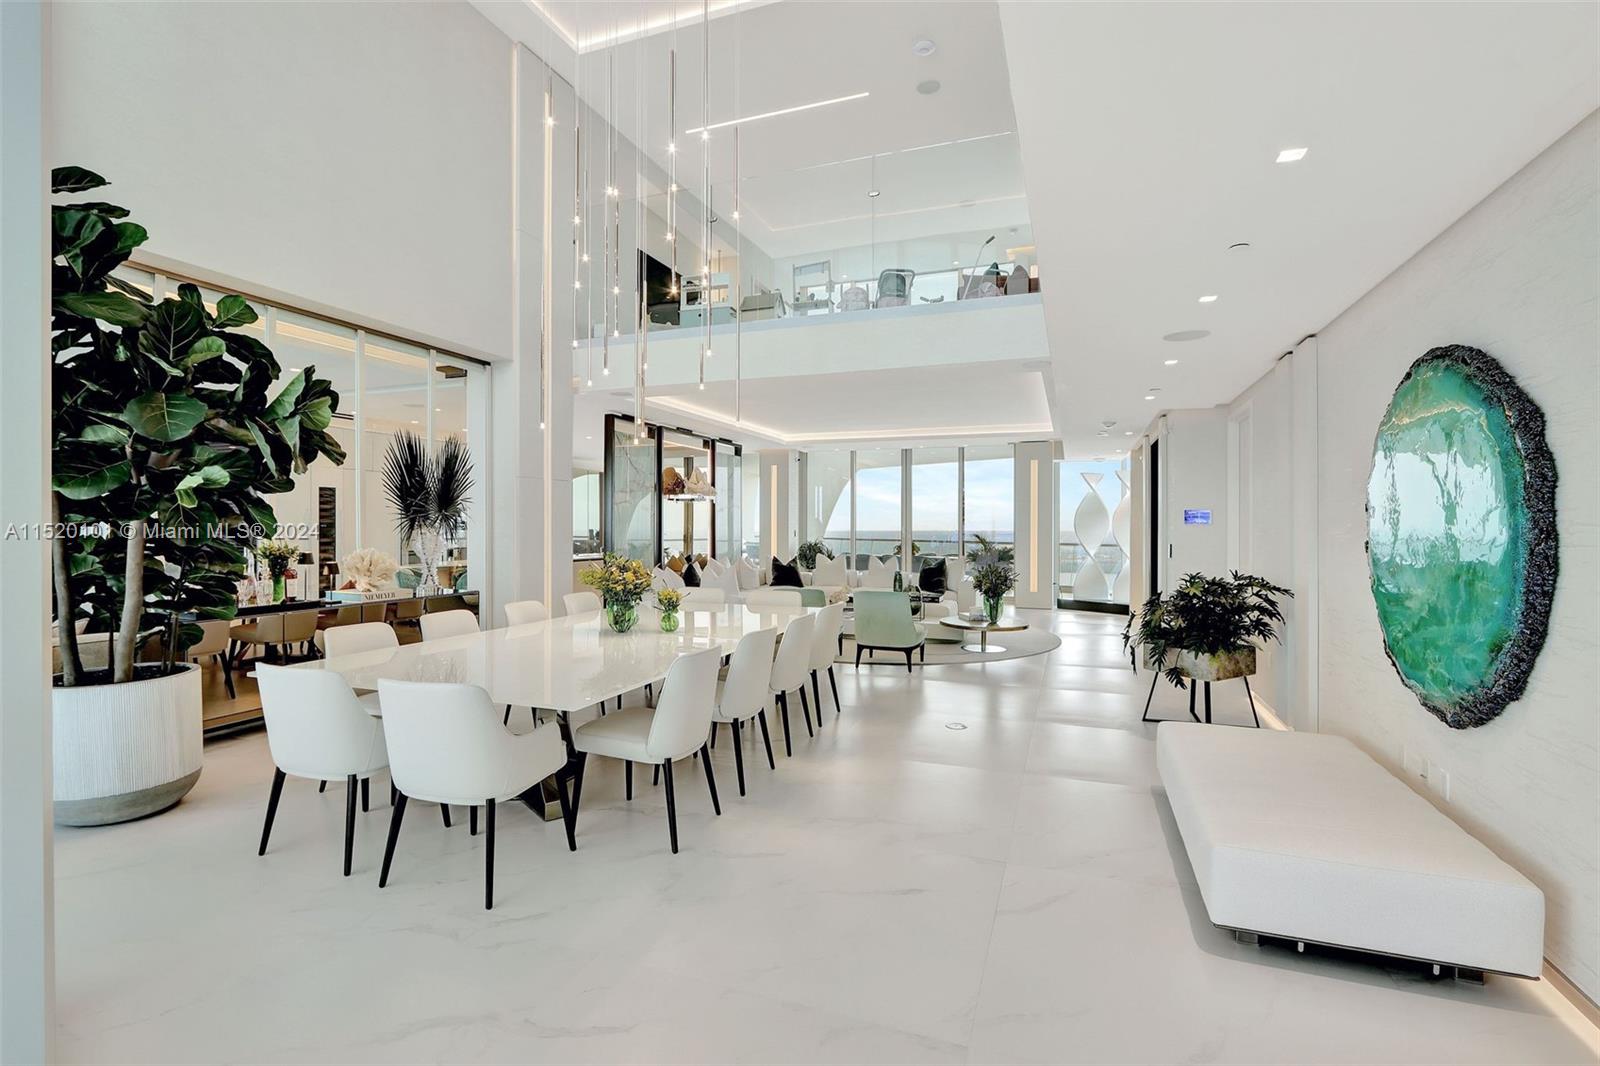 Explore the epitome of elegance in Miami's most enchanting Sky Villa apartment, offering 6,387 SF of air-conditioned space "per dev floor plan" and an additional 4,000 SF of balconies that command panoramic views of the sunrise, sunset, ocean, and cityscape. This residence comprises five bedrooms, a maid's quarter, an outdoor gourmet kitchen, a private gym, and a secluded sauna. Impeccably furnished and professionally designed by the acclaimed architect and designer, Mirta Ariaran. This top-tier, 5-star resort-style condominium features exclusive amenities, including a private restaurant, bar, gym, full-service spa with, saunas, and a hot tub. Additionally, it boasts a private beach pavilion with beach services, heated pool, library, billiard room, play areas, and a teen room.